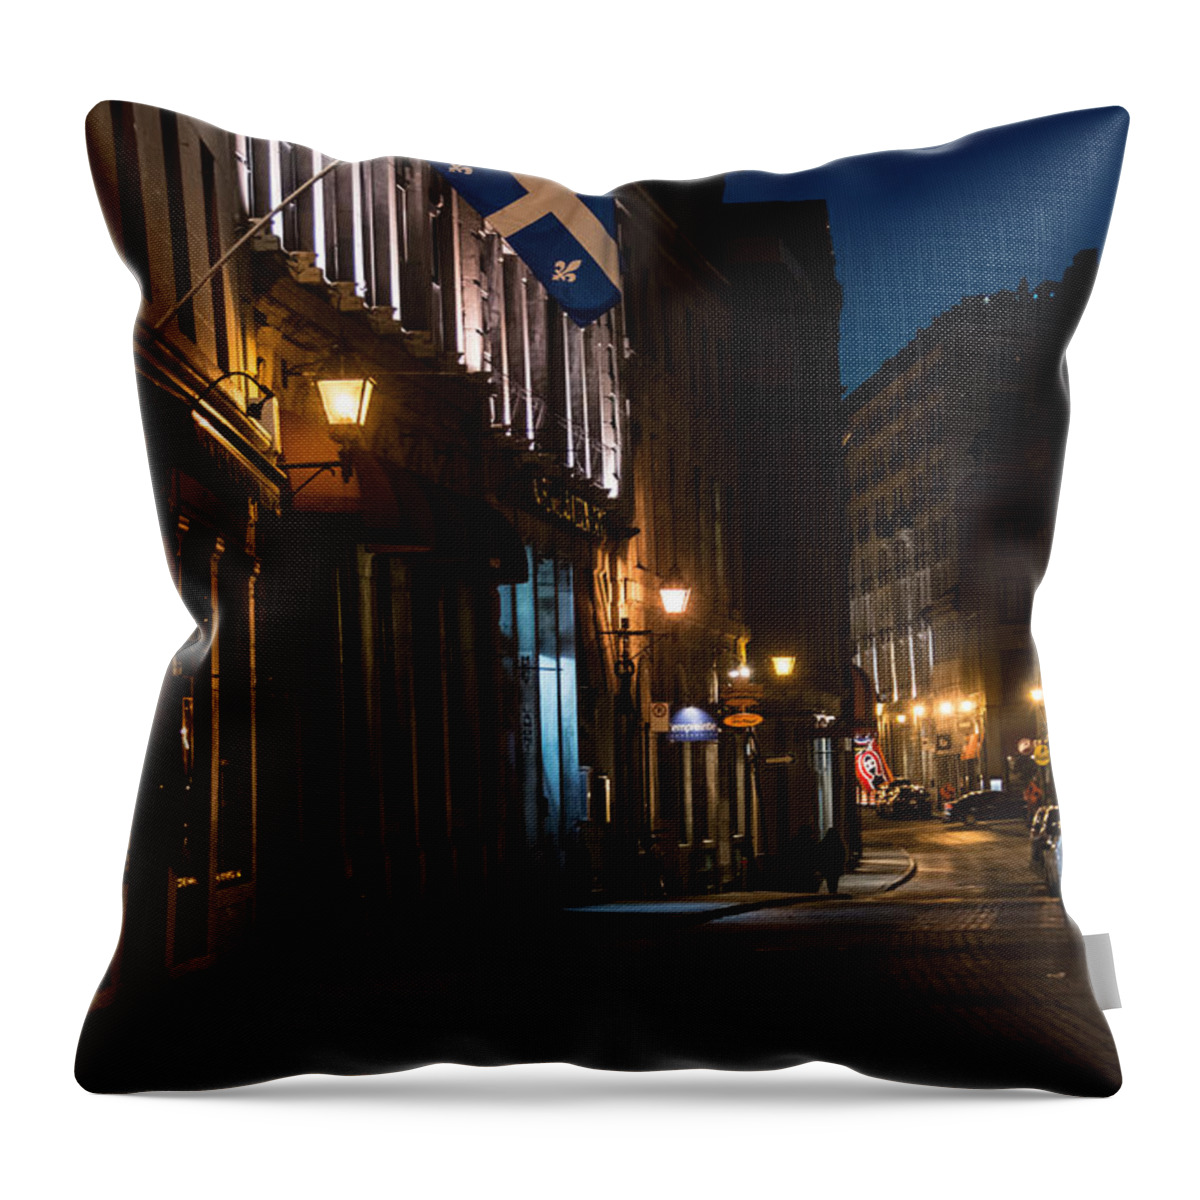 Old Montreal Throw Pillow featuring the photograph Old Montreal at Night by Cheryl Baxter